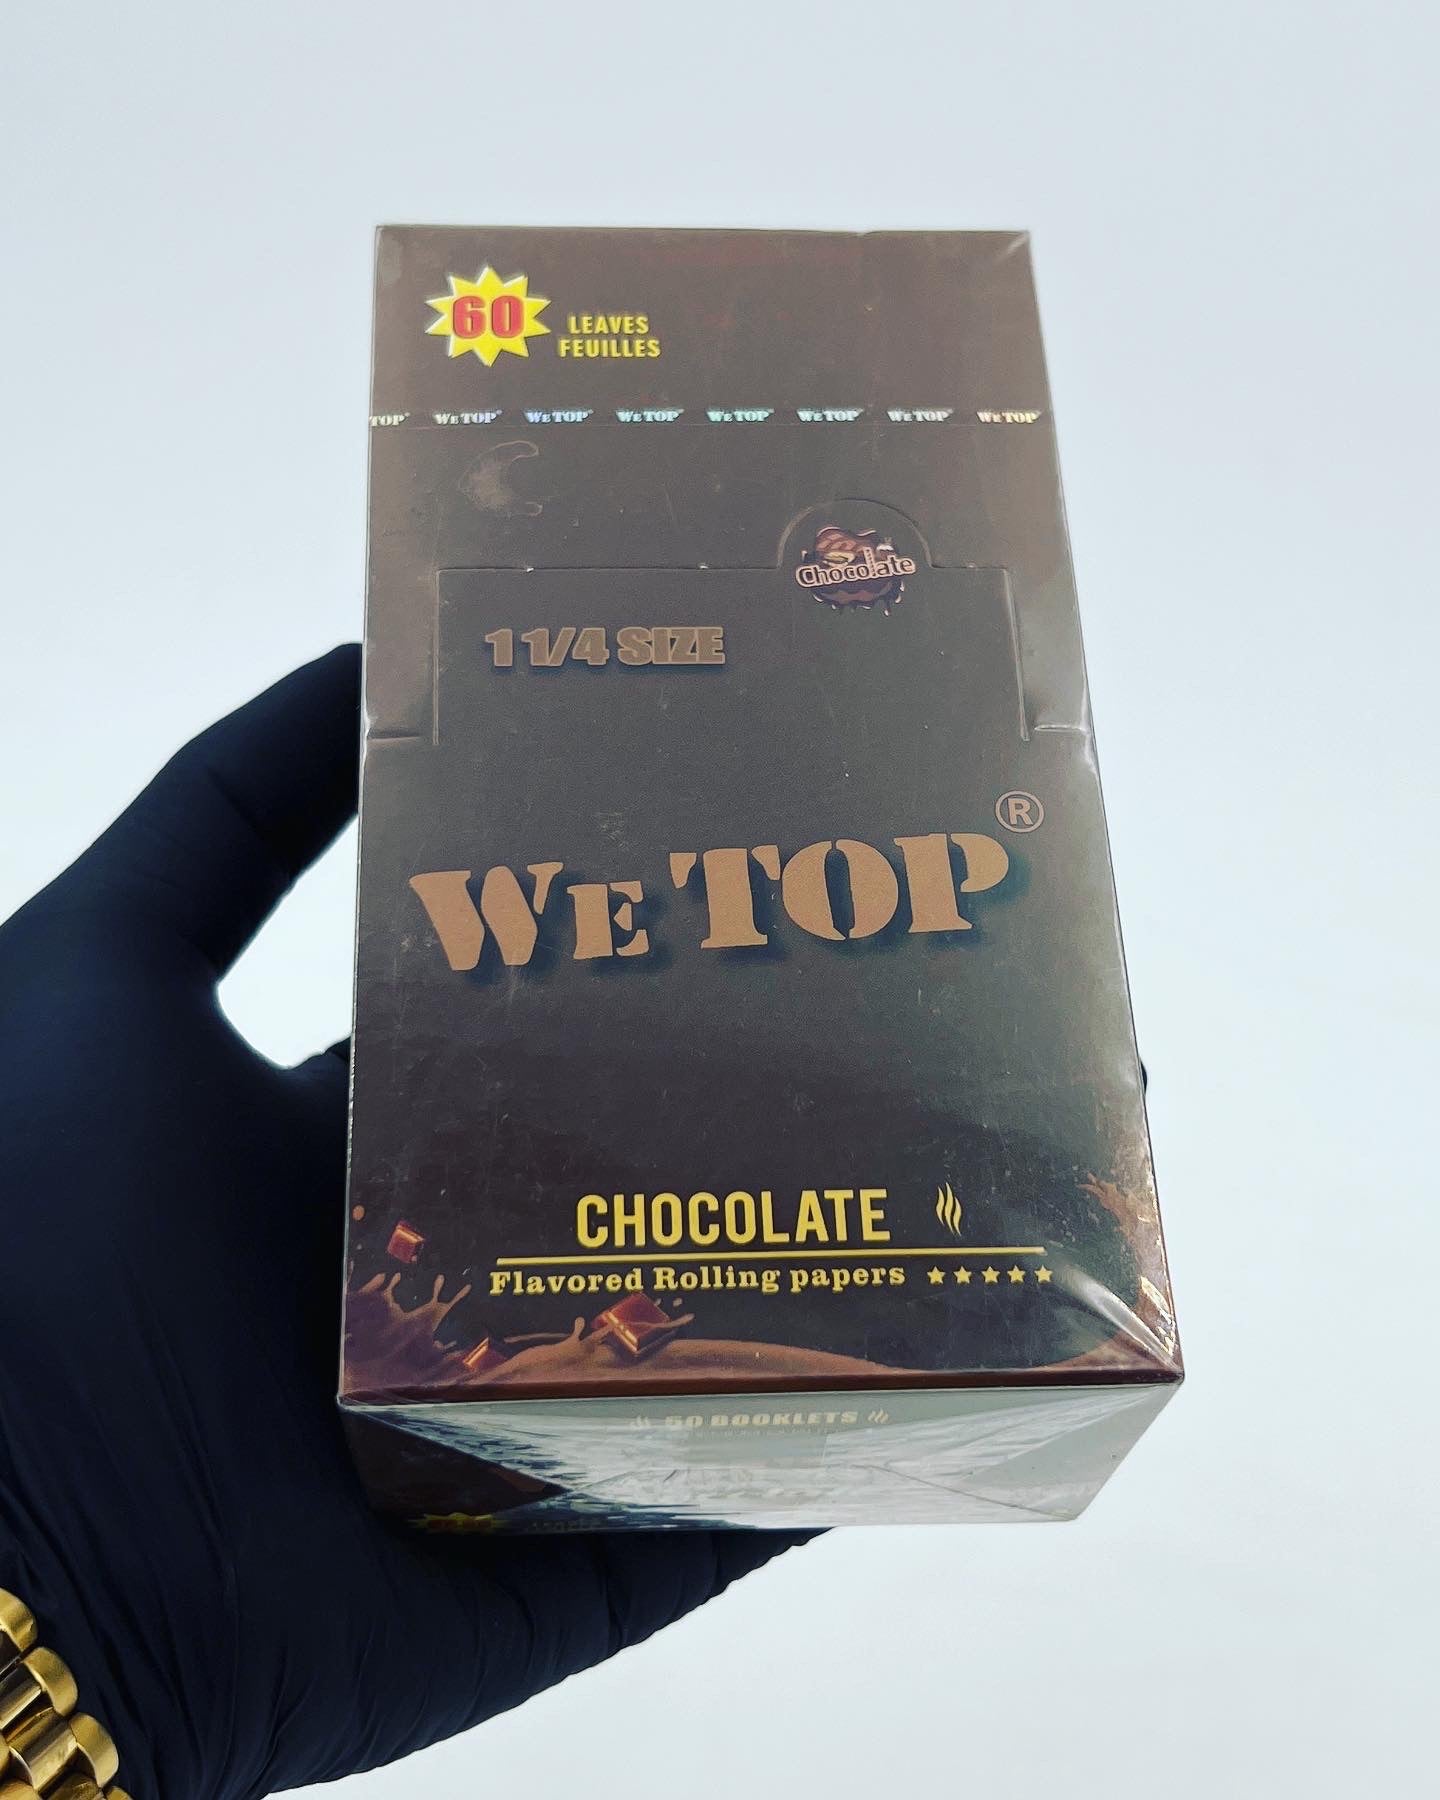 Wetop Chocolate Flavoured Rolling Papers 60 Leaves! (Full Box)